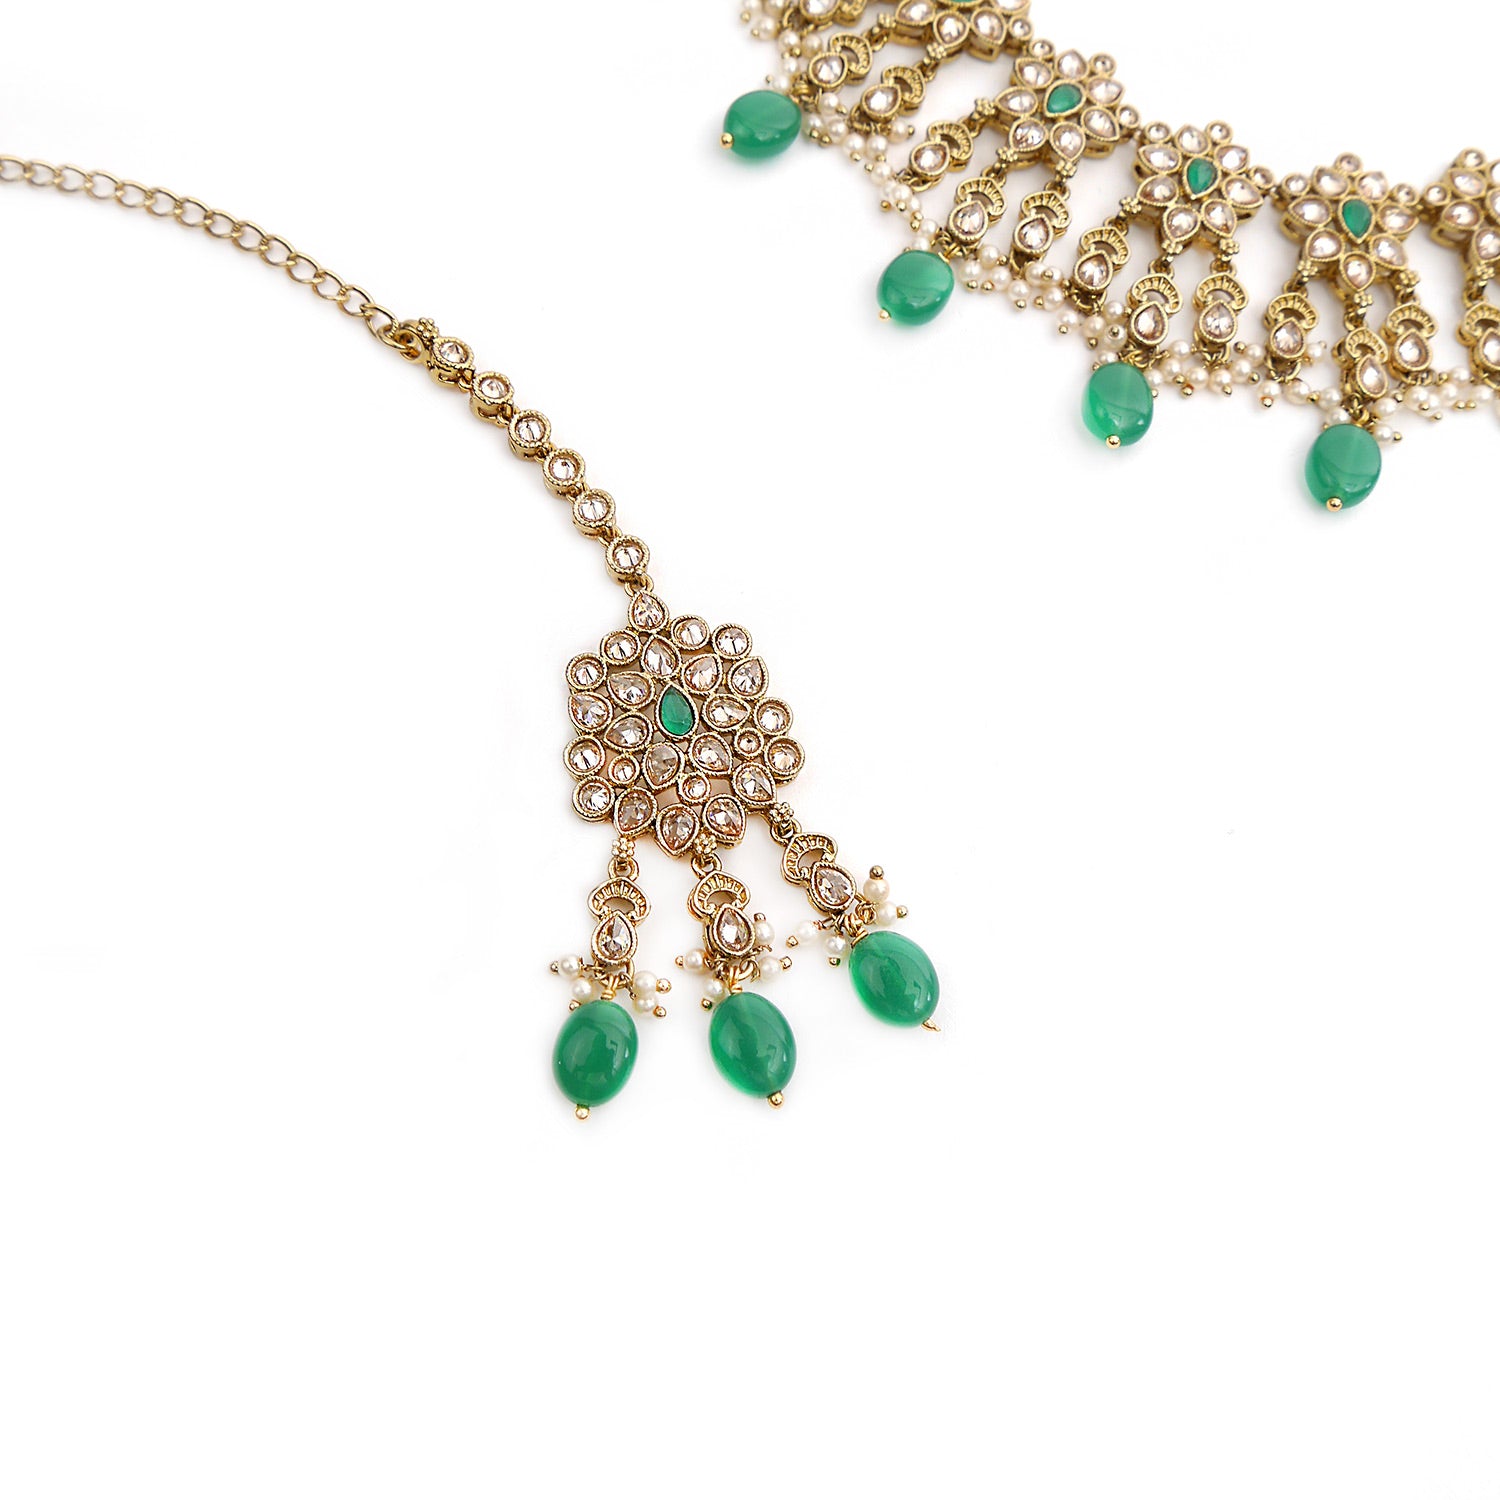 Niya Necklace Set in Emerald and Antique Gold